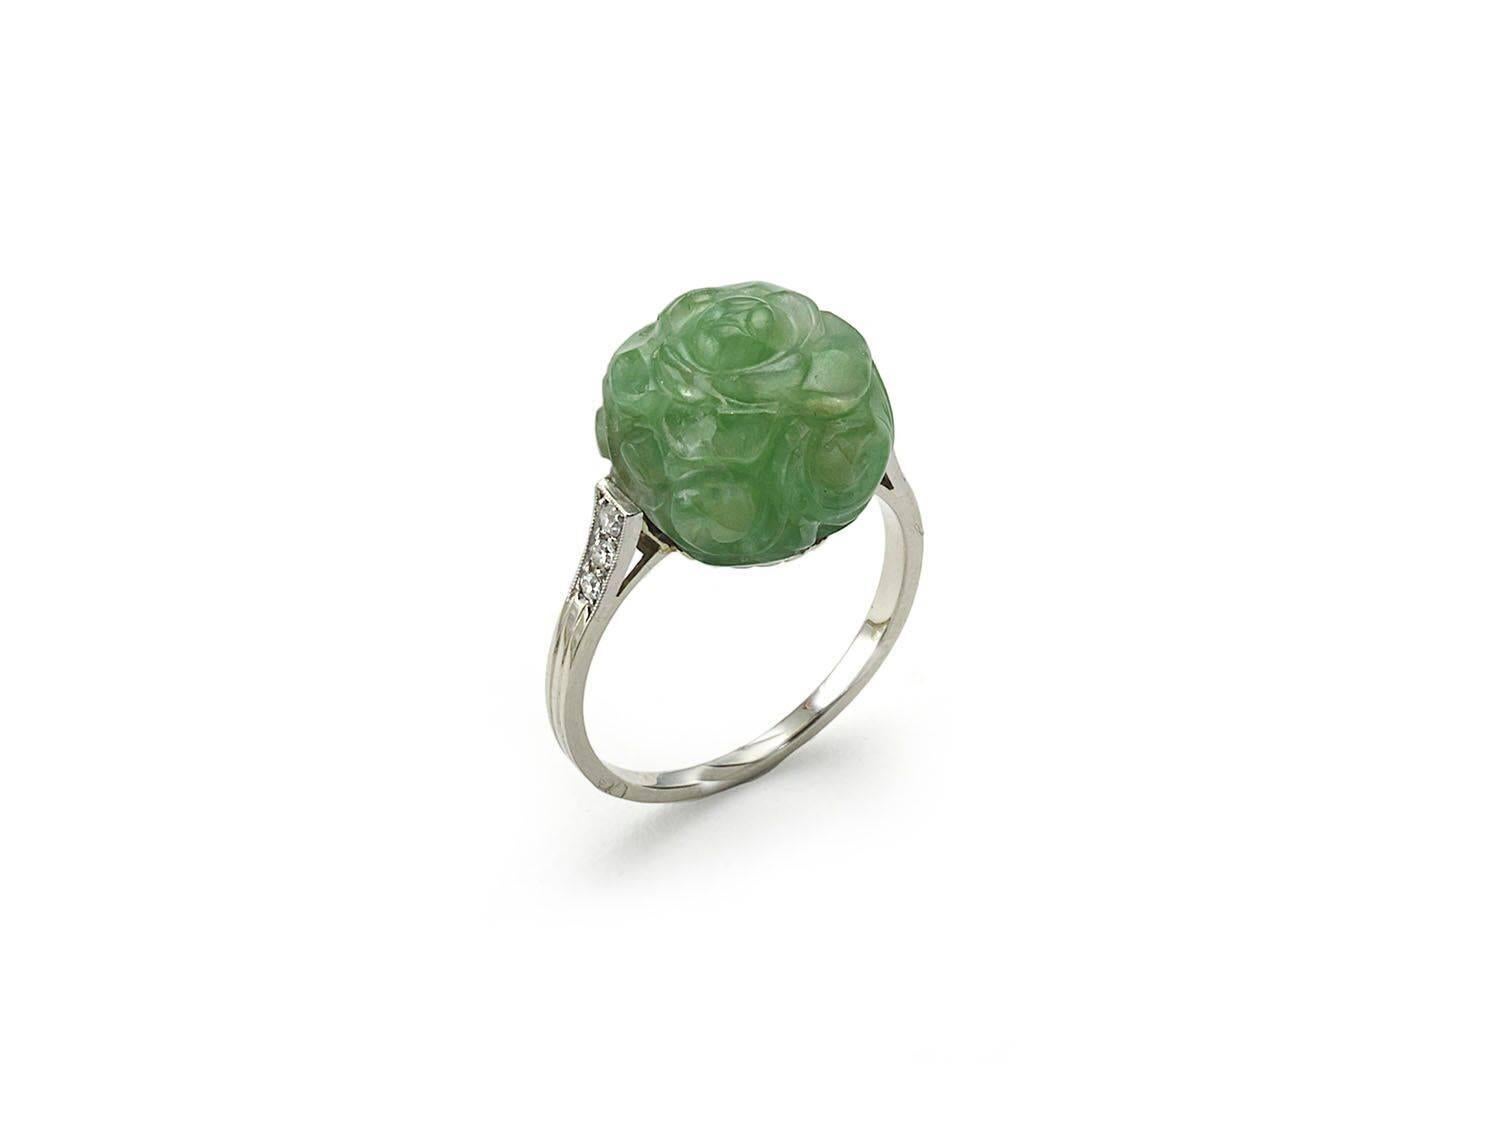 A carved jadeite jade ring, in the form of a rose, with eight-cut diamonds in the shoulders, in platinum millegrain edged settings, mounted in 18ct white gold, with a French dog mark, for the 18ct white gold mount and an eagle mark for the platinum